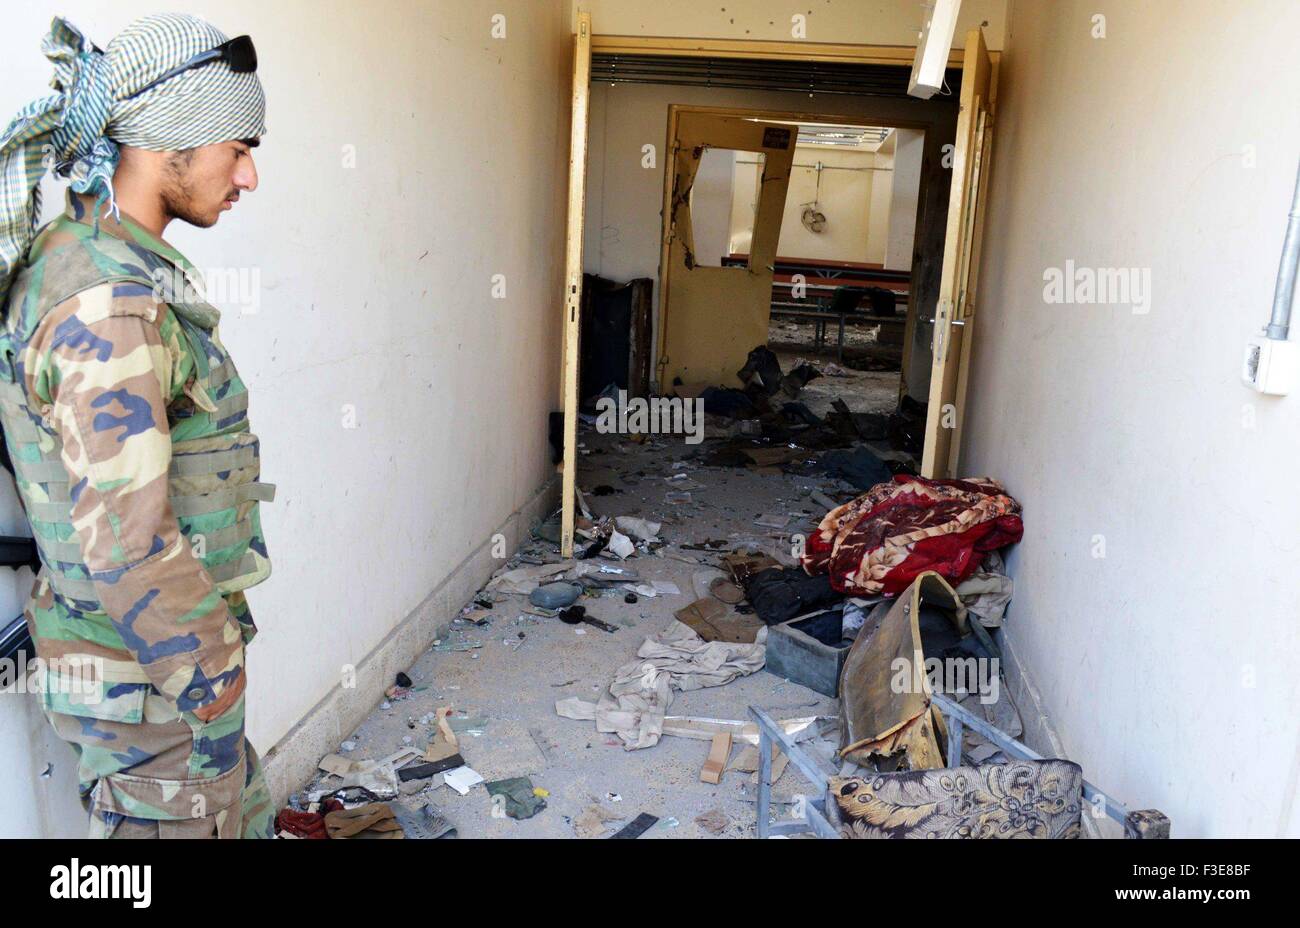 Kunduz, Kunduz province of Afghanistan. 6th Oct, 2015. An Afghan soldier stands in a destroyed room at a government building after Taliban fighters burnt it down in Kunduz city, capital of northern Kunduz province of Afghanistan, Oct. 6, 2015. Afghan security forces after five days of fierce fighting were able to reopen the road linking Baghlan to Kunduz city and sent reinforcement there to bolster government positions against Taliban fighters, police said. Credit:  Ajmal/Xinhua/Alamy Live News Stock Photo